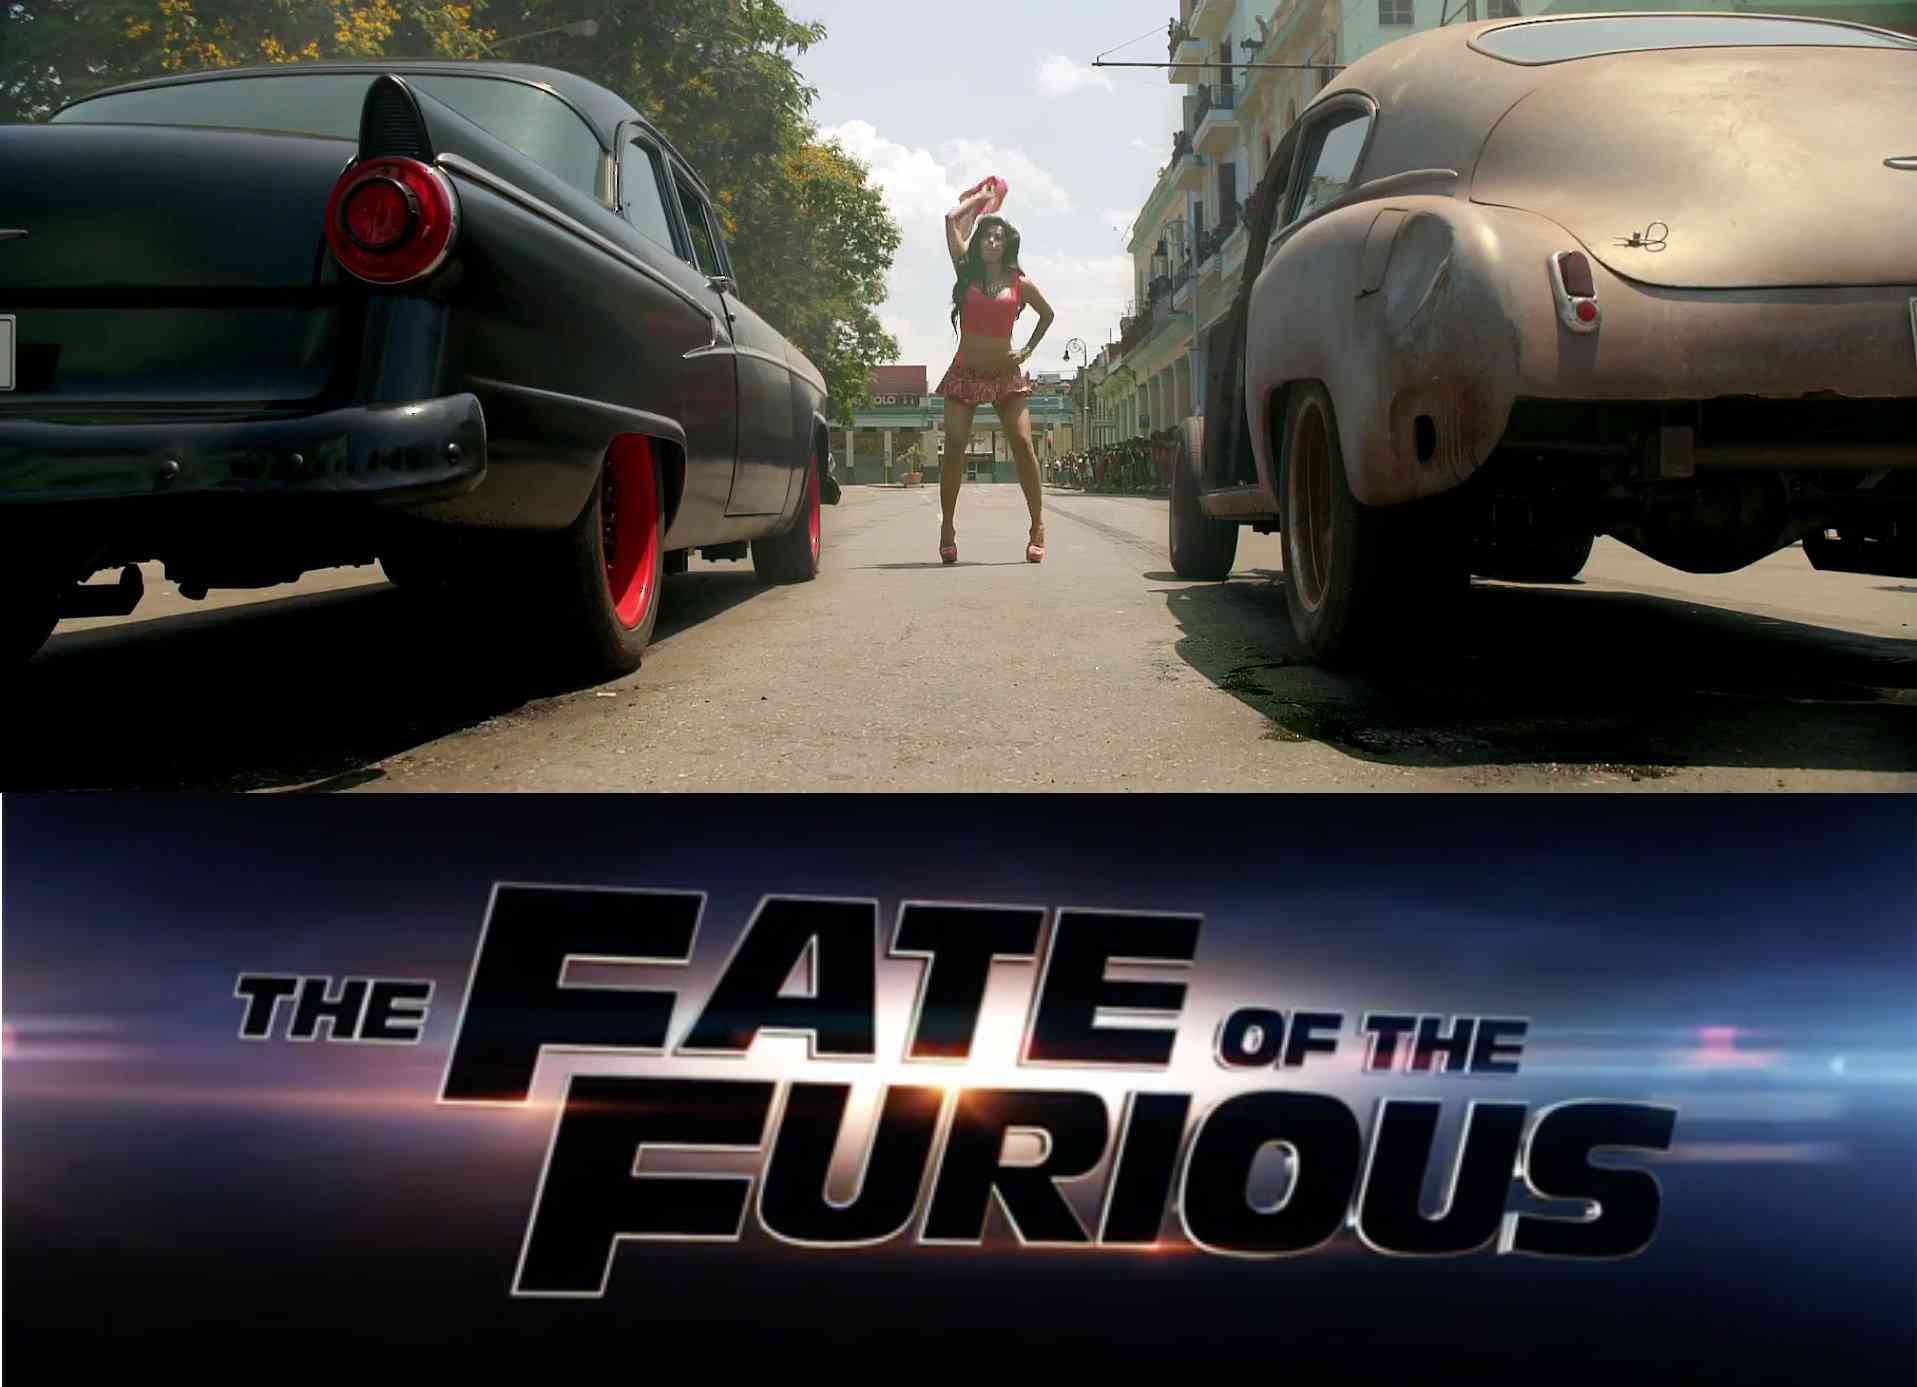 The Fate of the Furious Movie